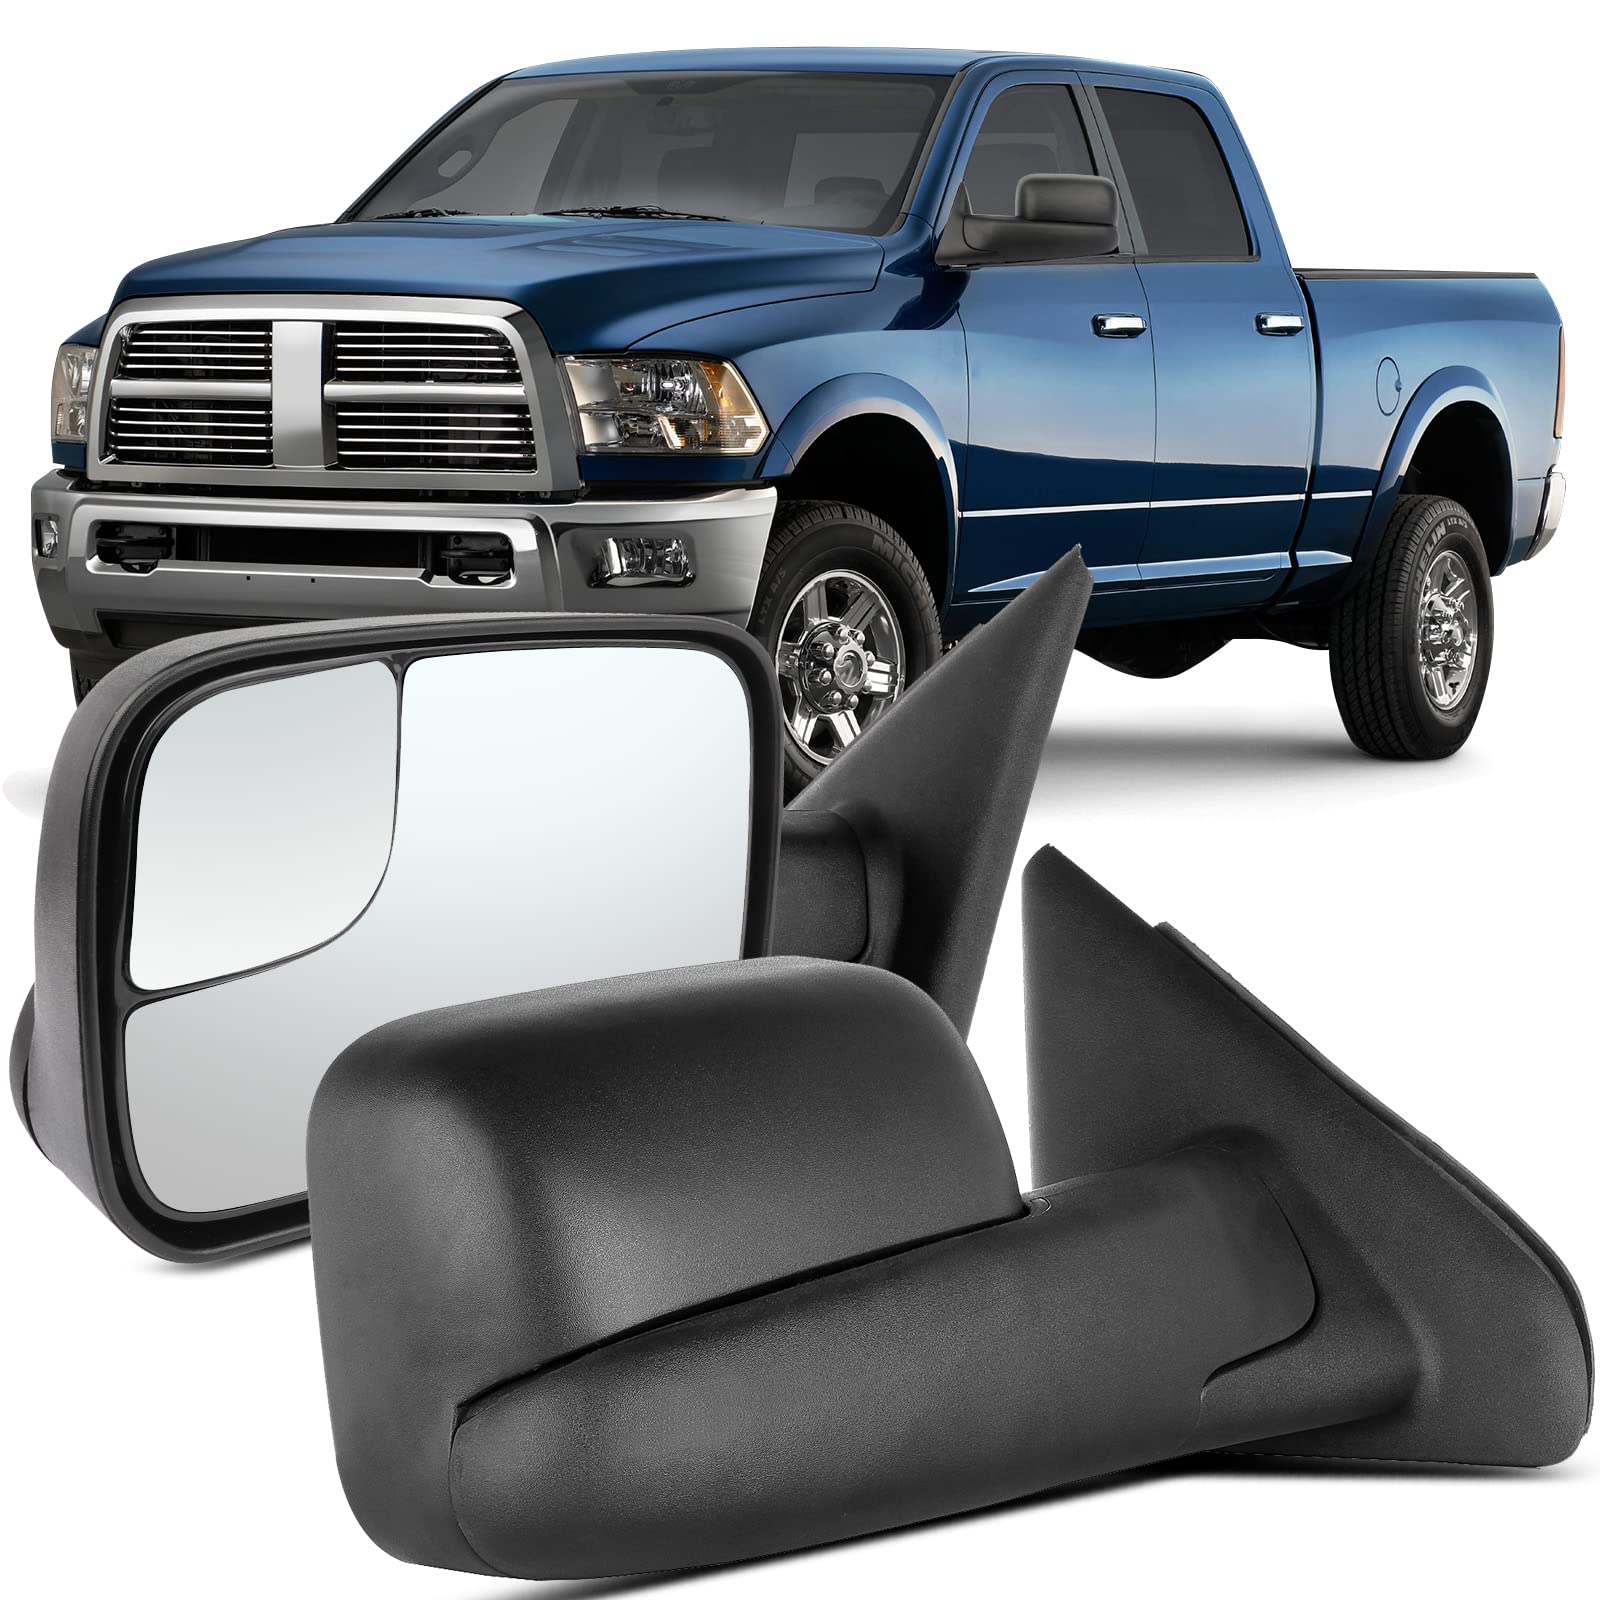 OCPTY Tow Mirrors Power Adjusted Heated Towing Mirrors for 2002-2008 for DODGE for Ram 1500 Pickup Truck 2003-2009 for DODGE for Ram 2500 Pickup Truck with Black housing Manual Flip Up